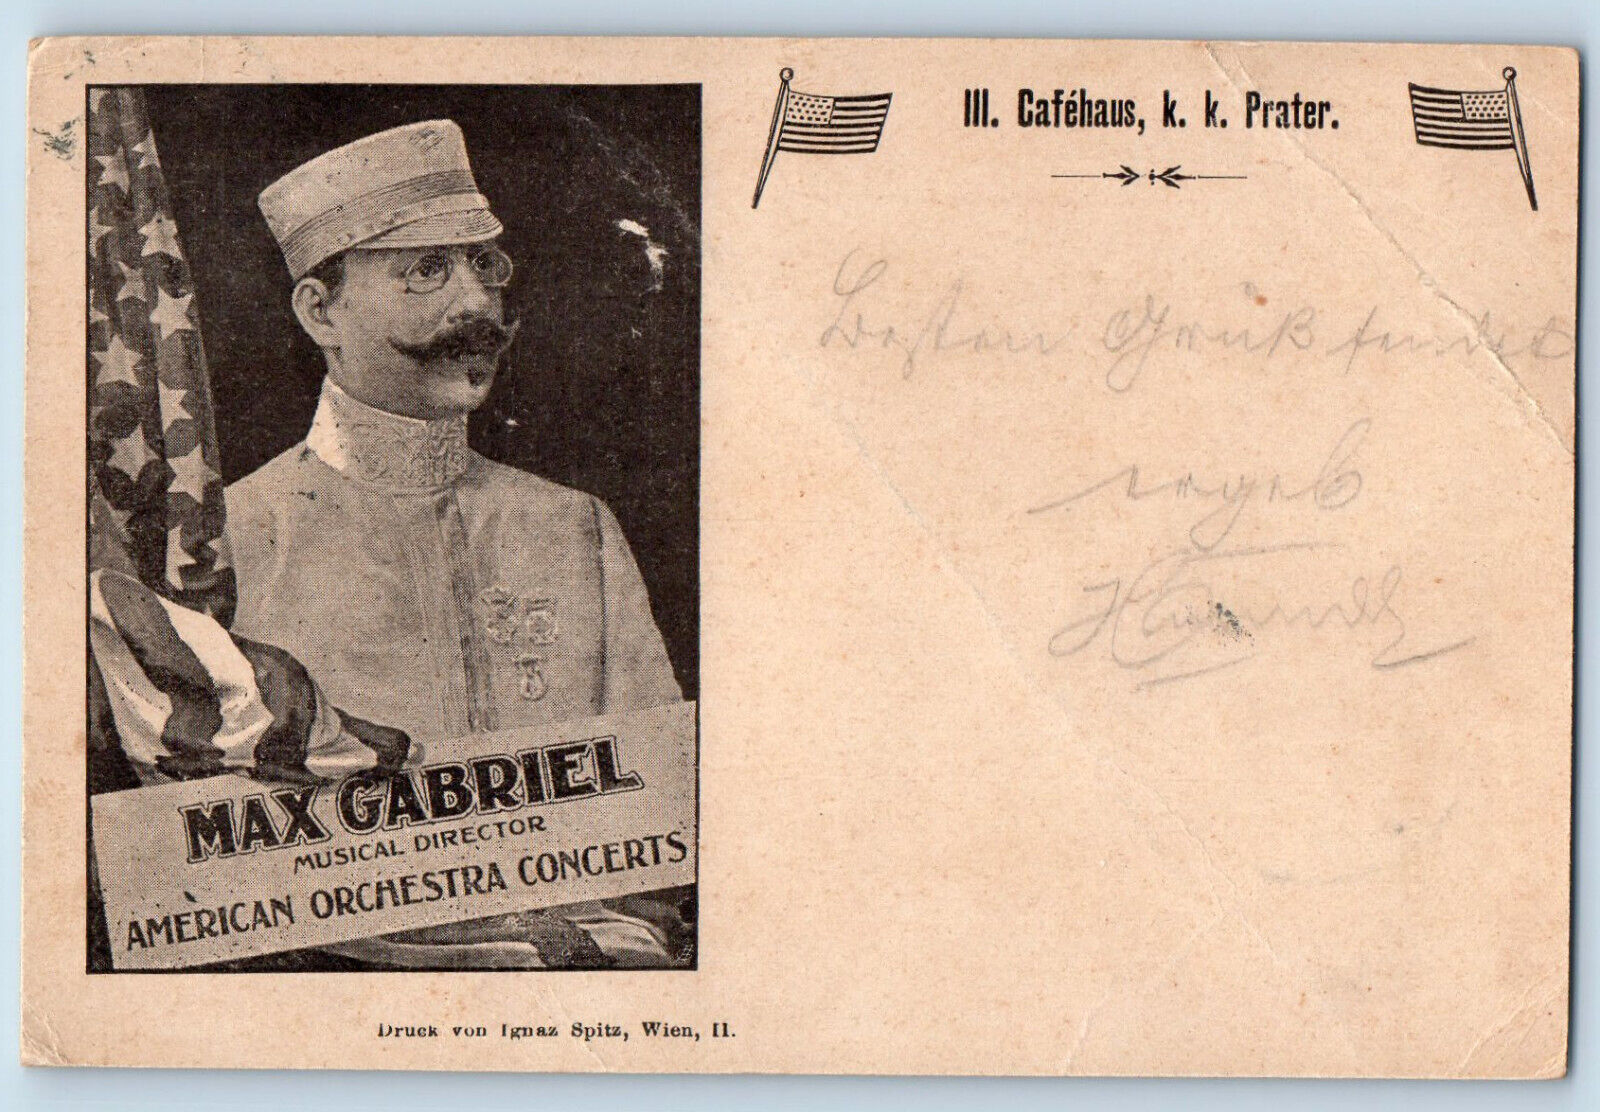 Germany Postcard Max Gabriel Music Director American Orchestra Concerts 1902